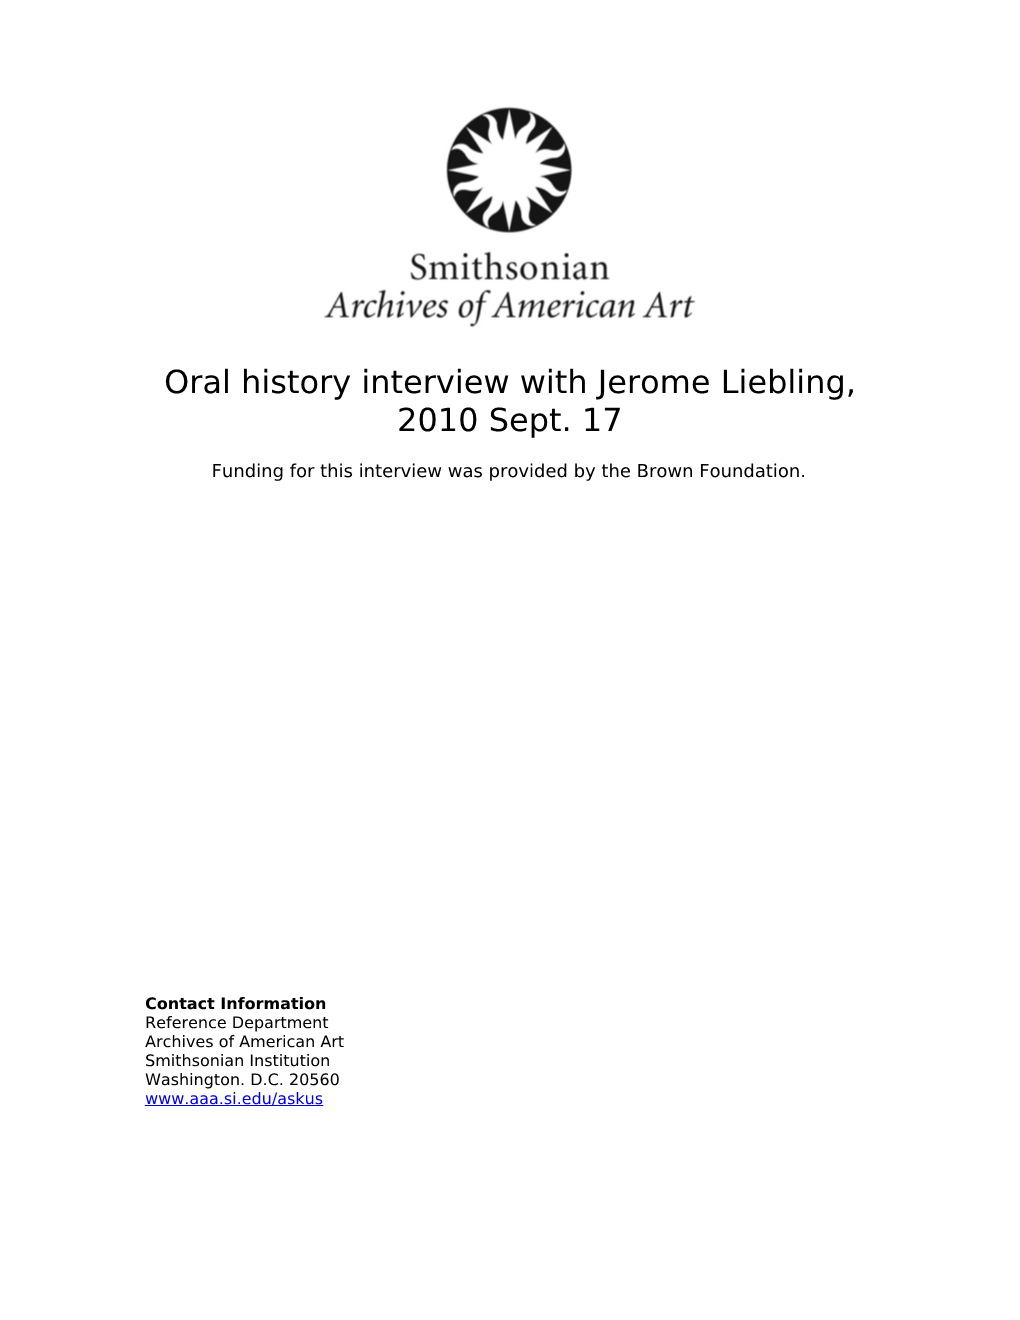 Oral History Interview with Jerome Liebling, 2010 Sept. 17